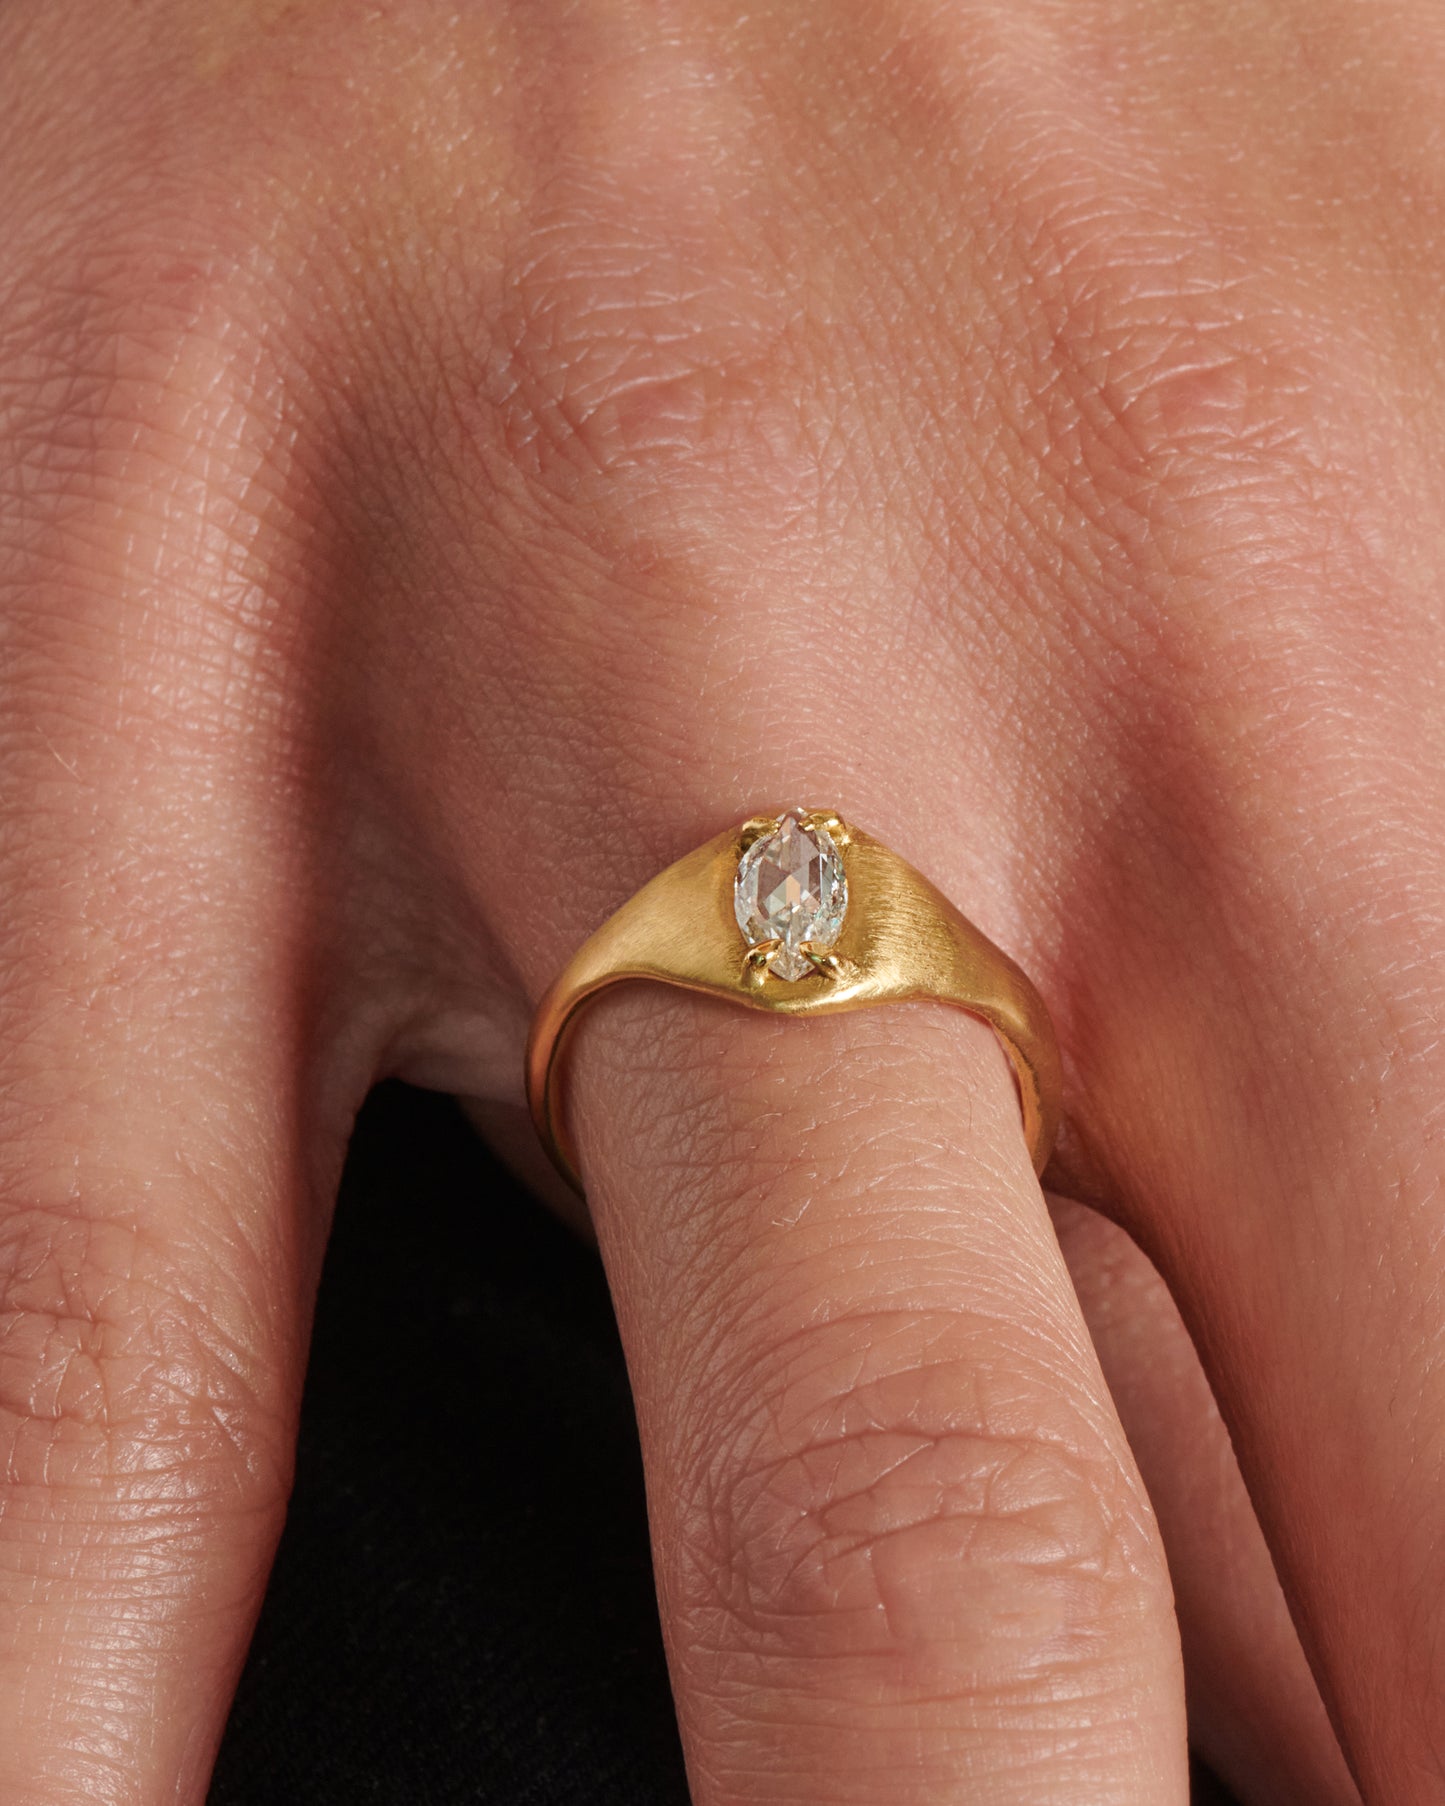 A prong set rose cut marquise diamond sits atop this satin-finish signet ring.